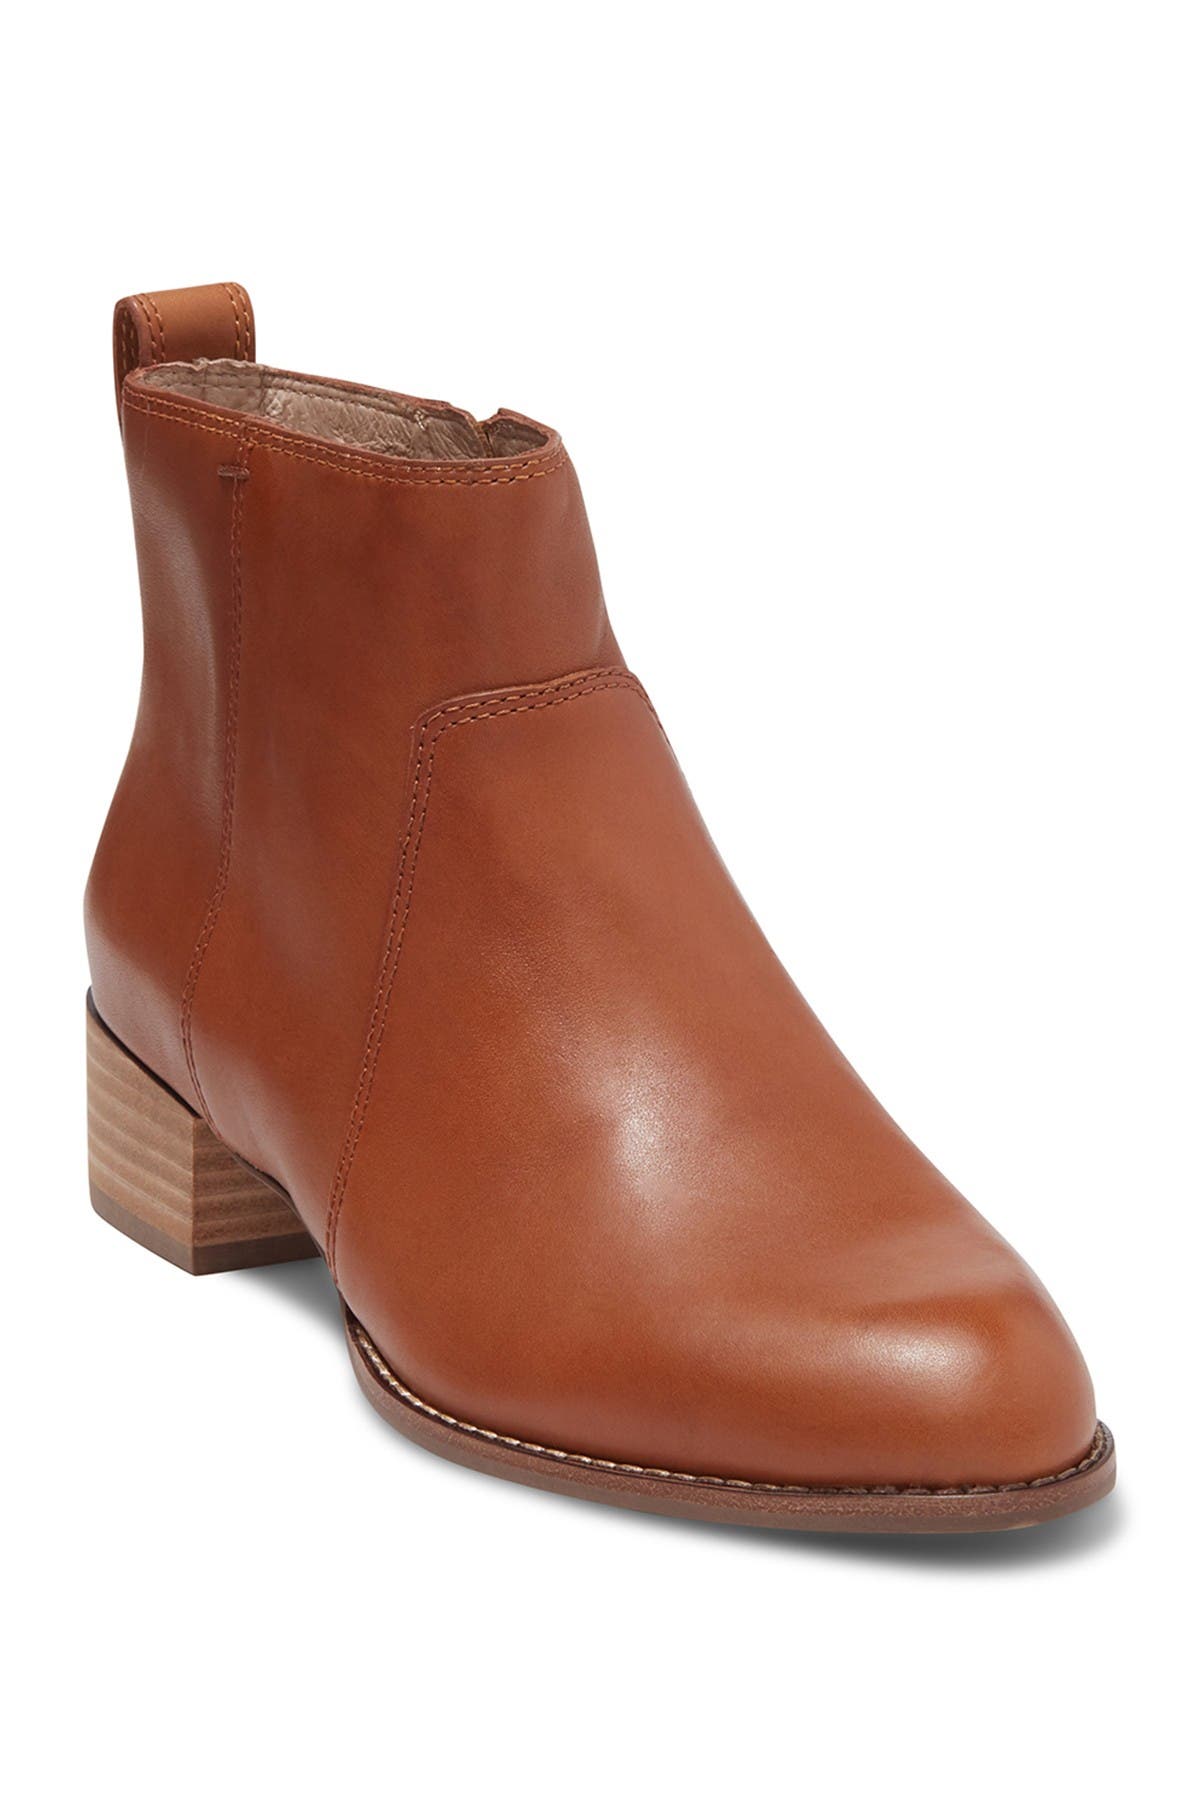 red wing 6 inch moc womens